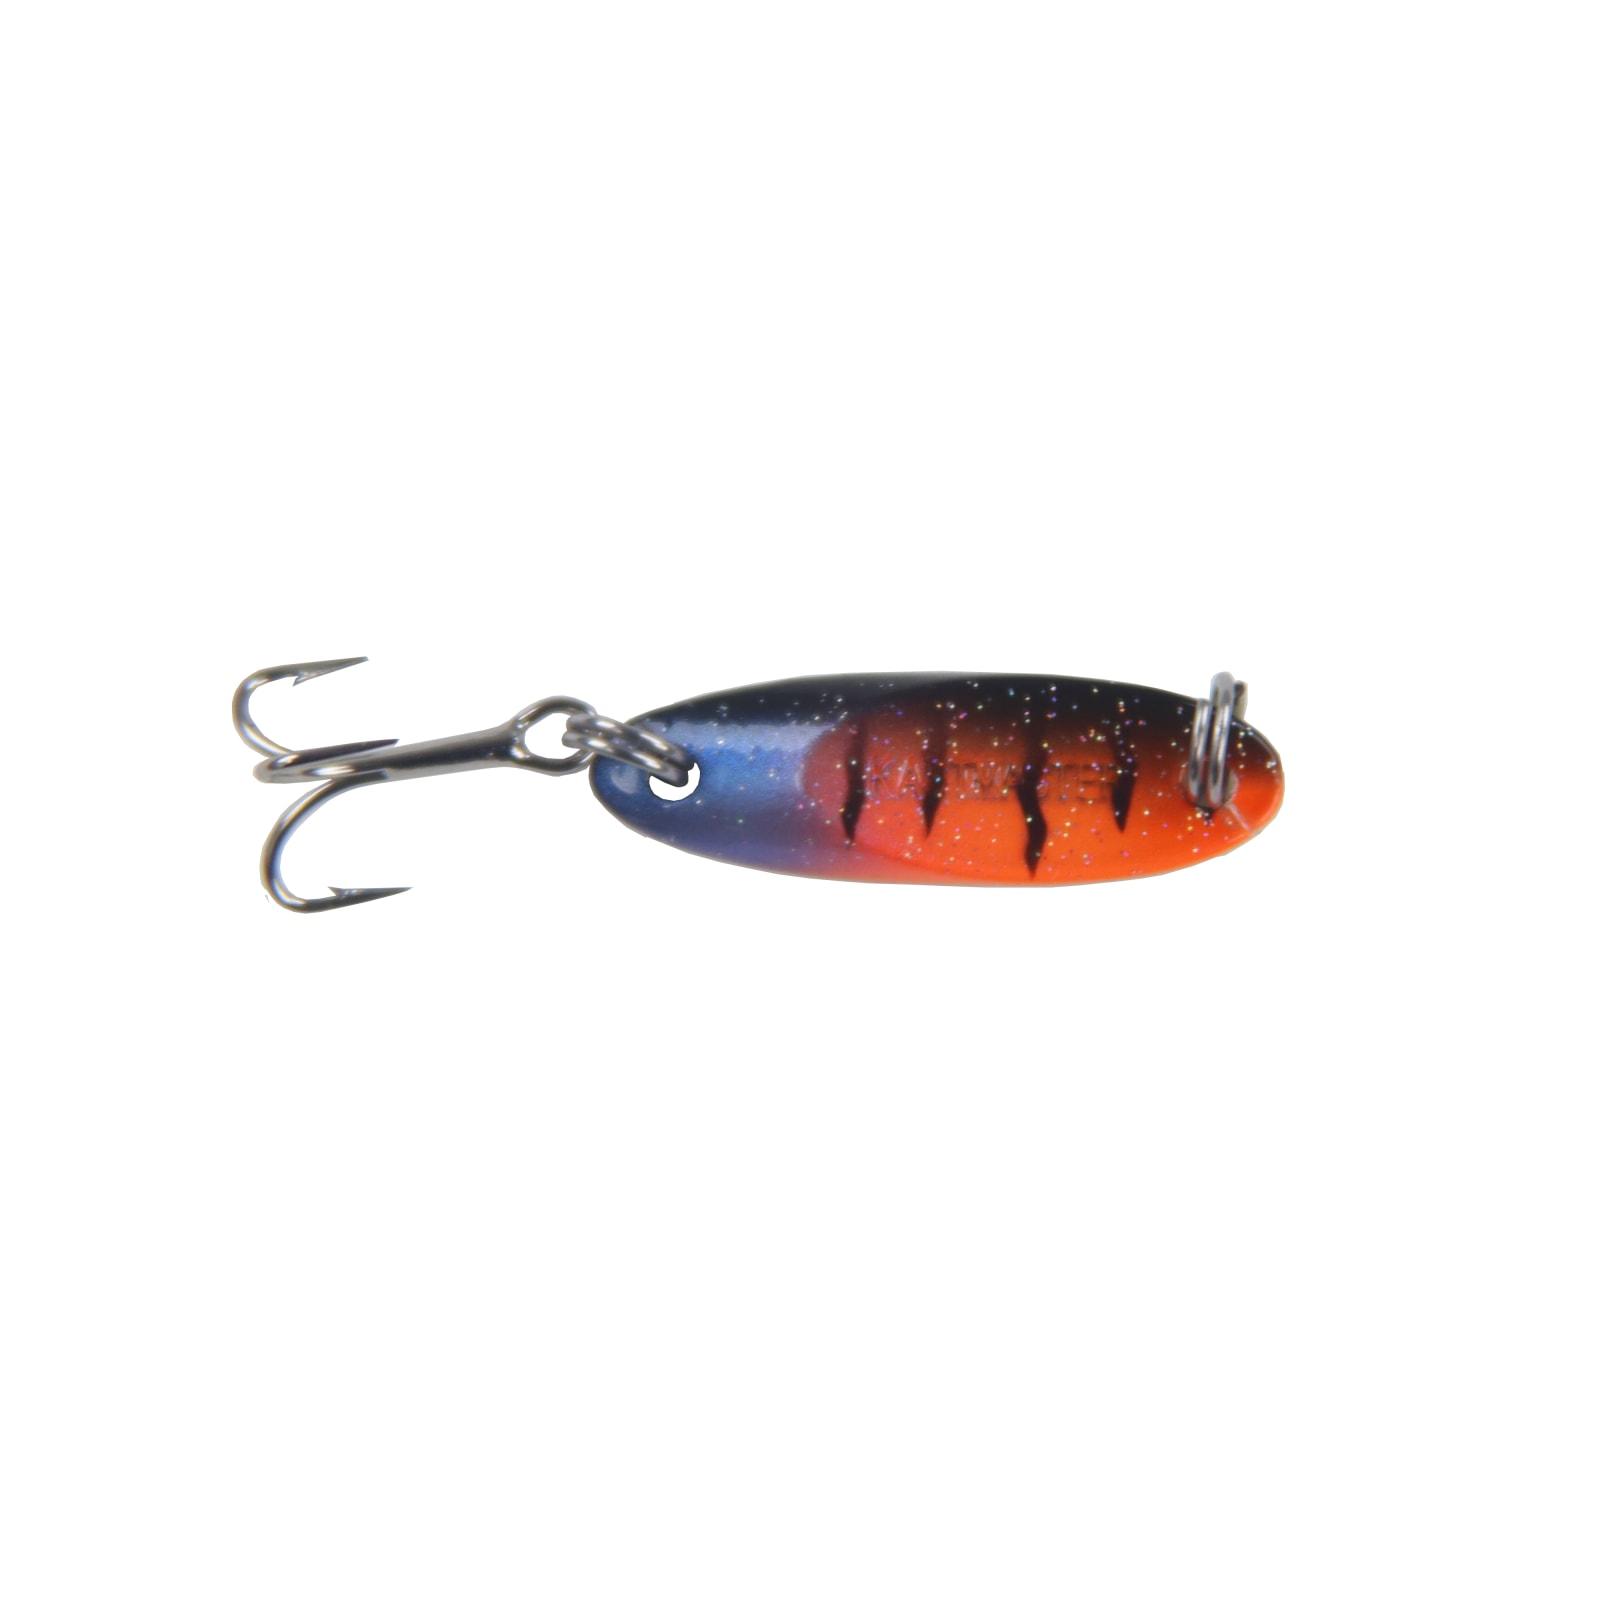 Glow Chief Kastmaster DR Tungsten Ice Spoon by Acme Tackle Company at Fleet  Farm